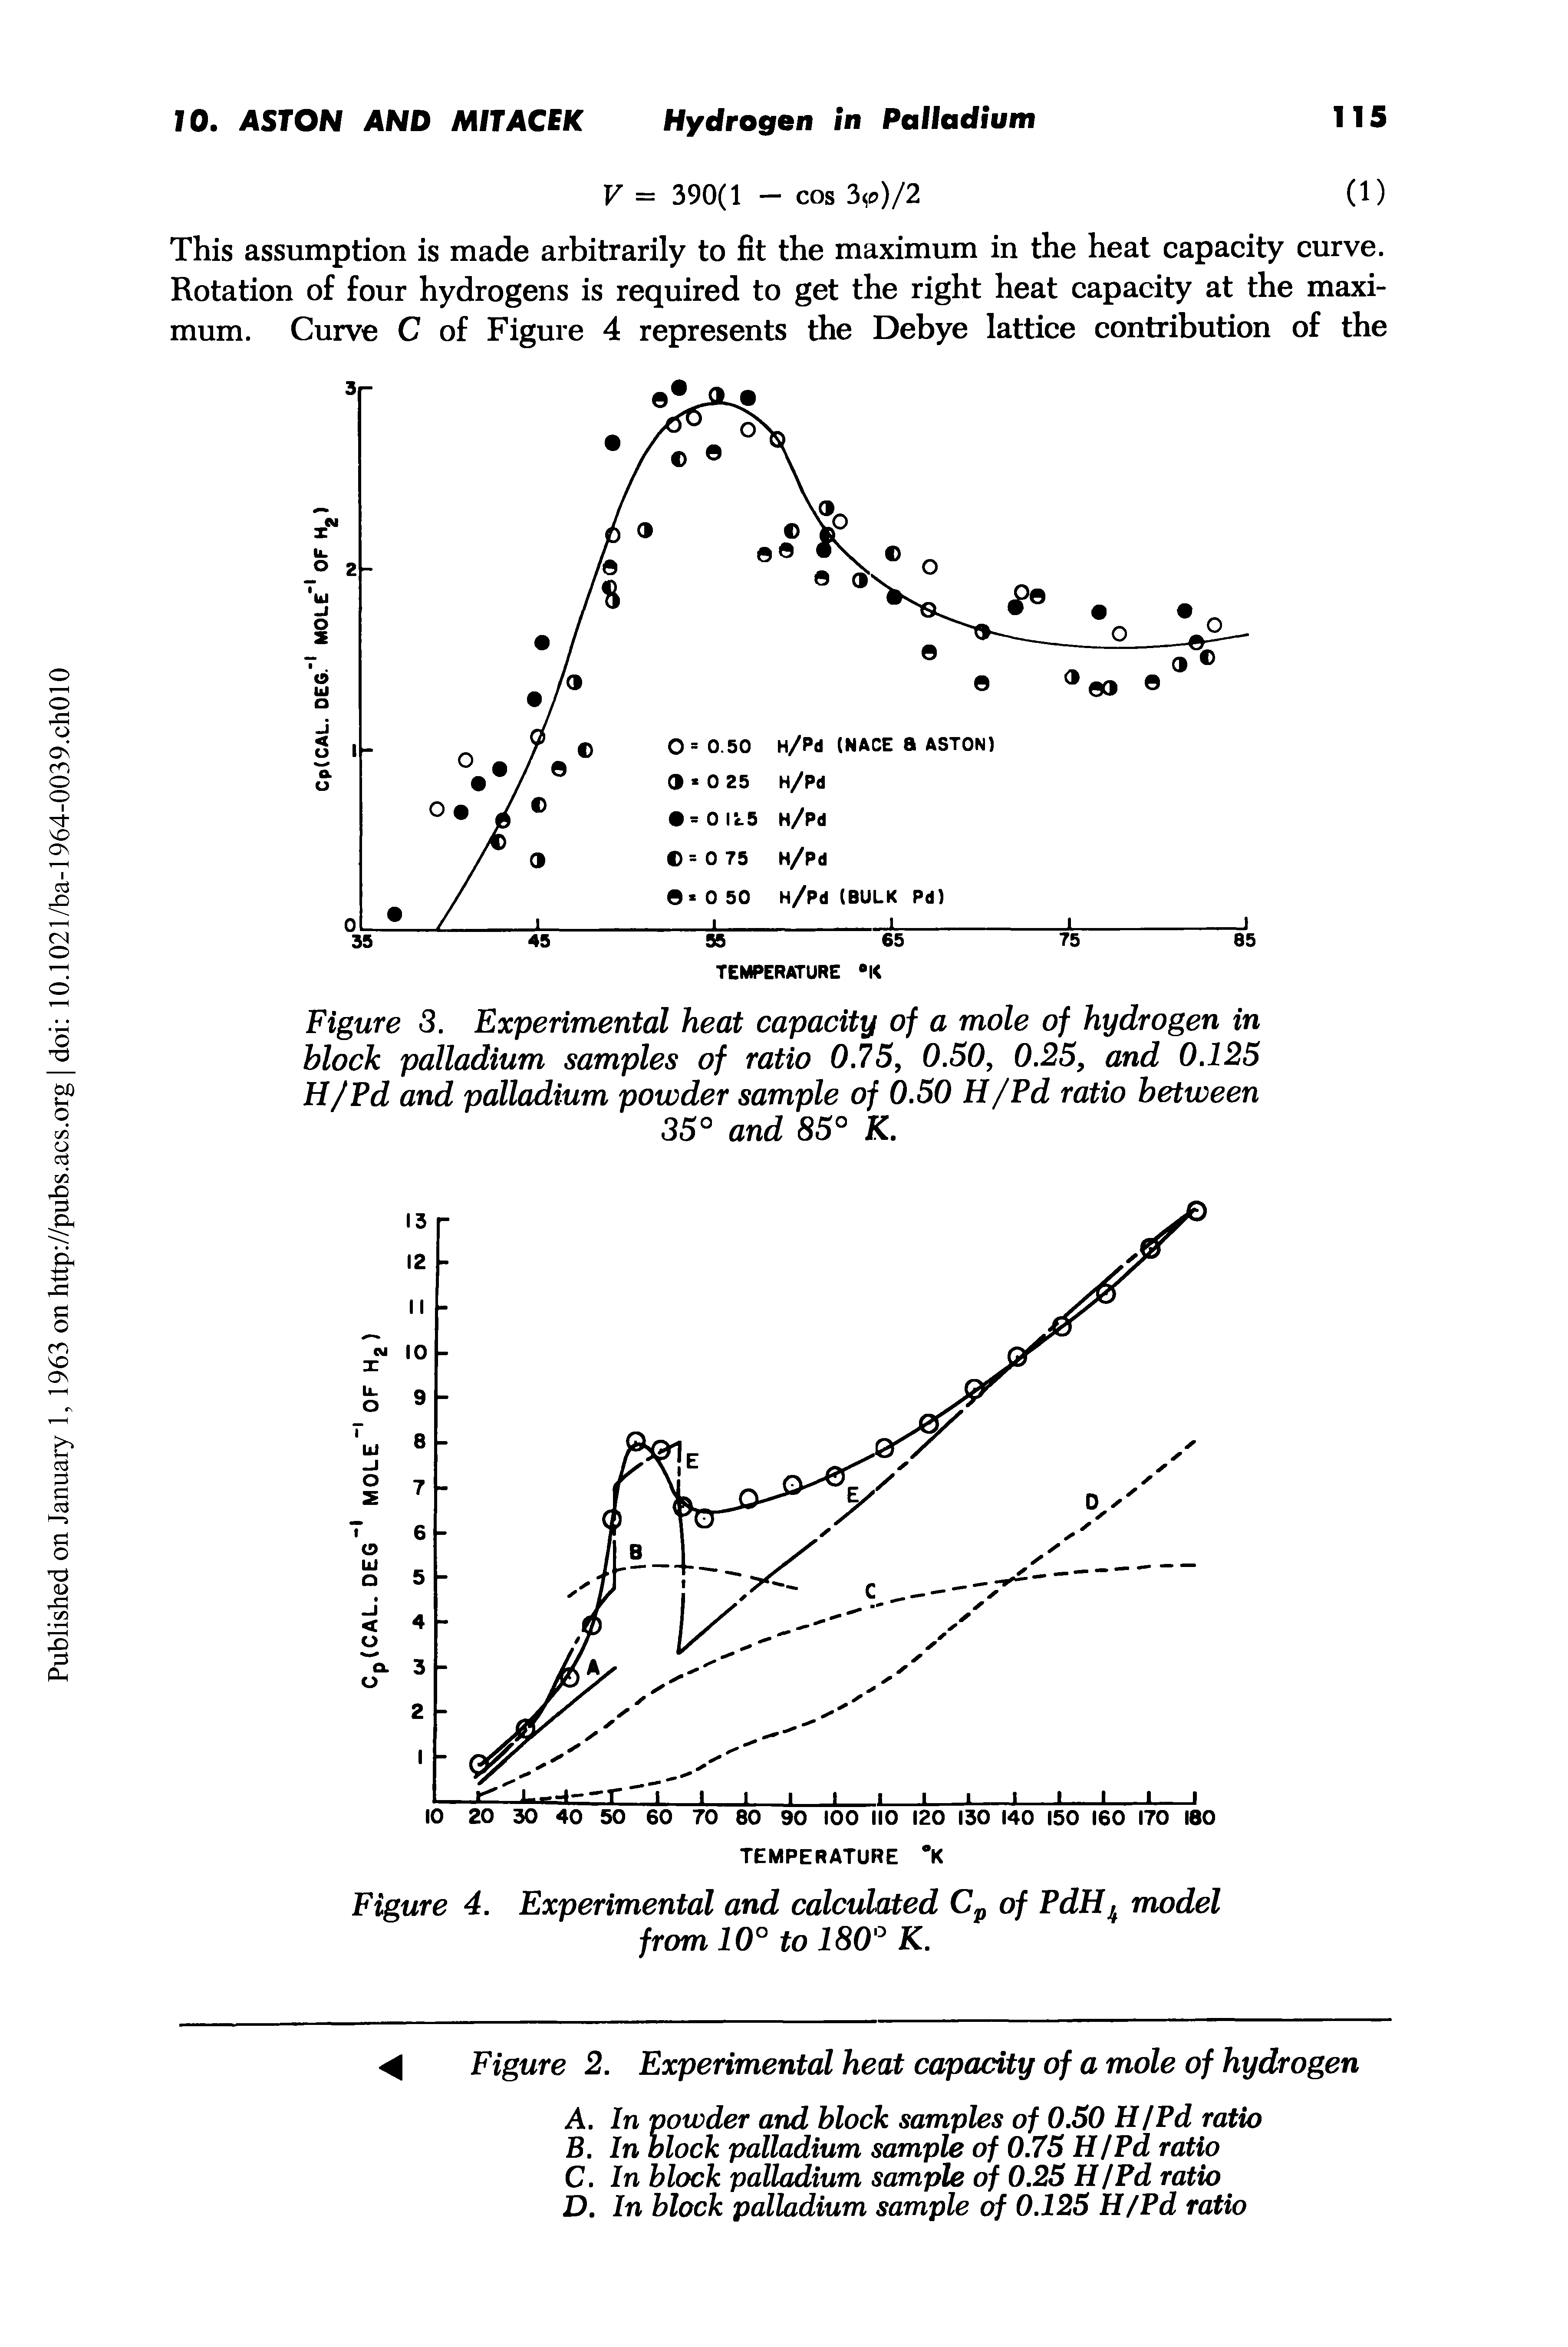 Figure 3. Experimental heat capacity of a mole of hydrogen in block palladium samples of ratio 0.75, 0.50, 0.25, and 0.125 H/Pd and palladium powder sample of 0.50 H/Pd ratio between 350 and 85° K.